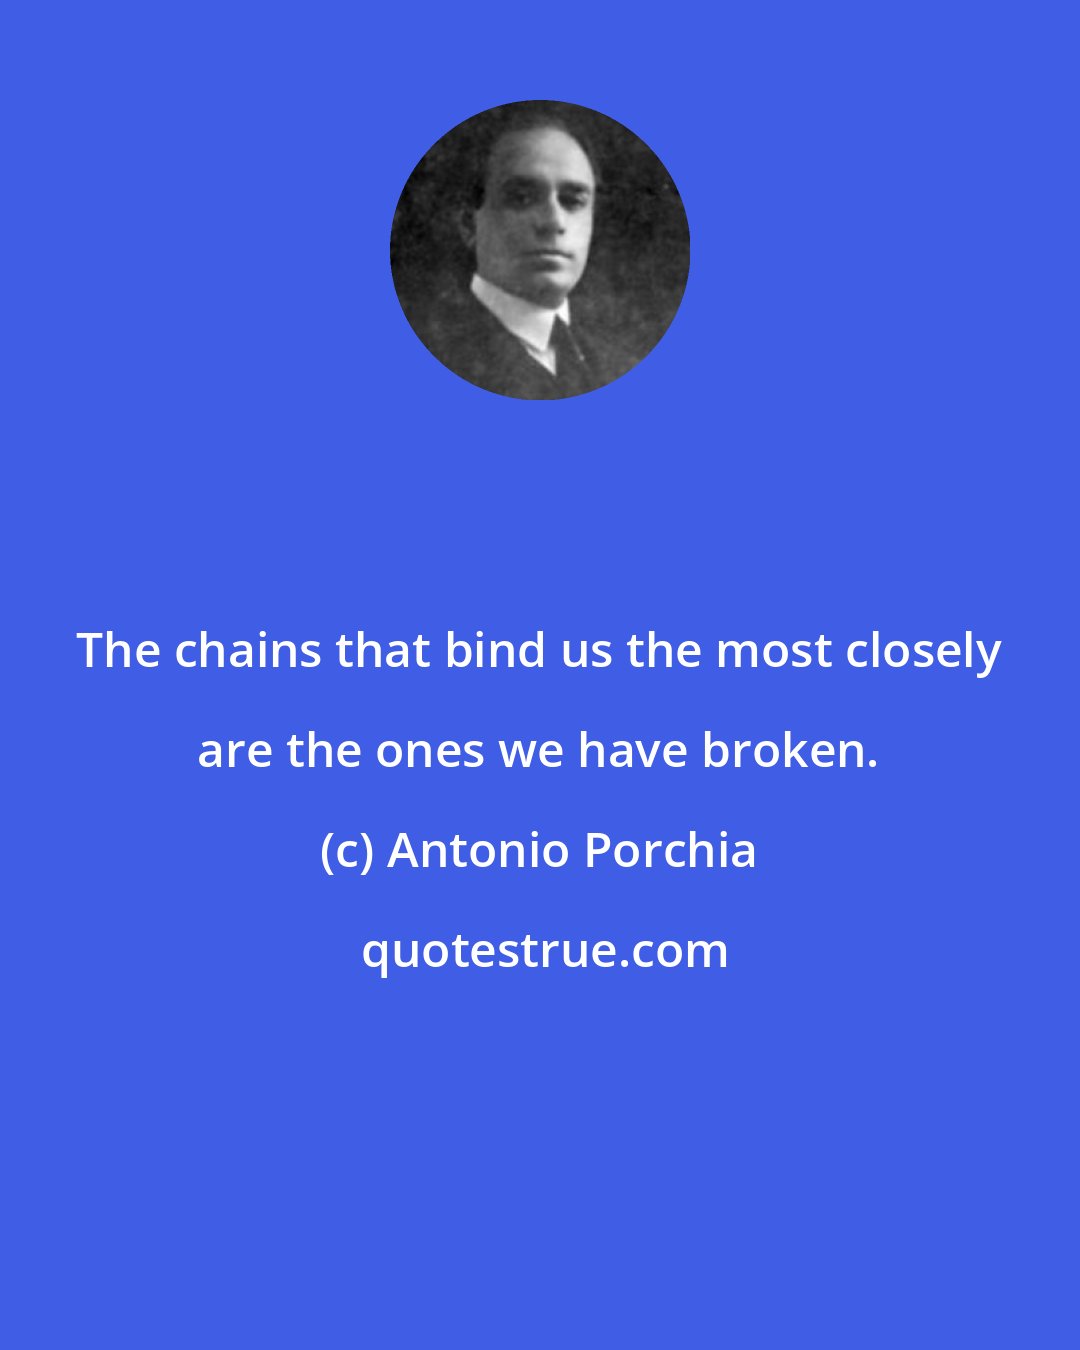 Antonio Porchia: The chains that bind us the most closely are the ones we have broken.